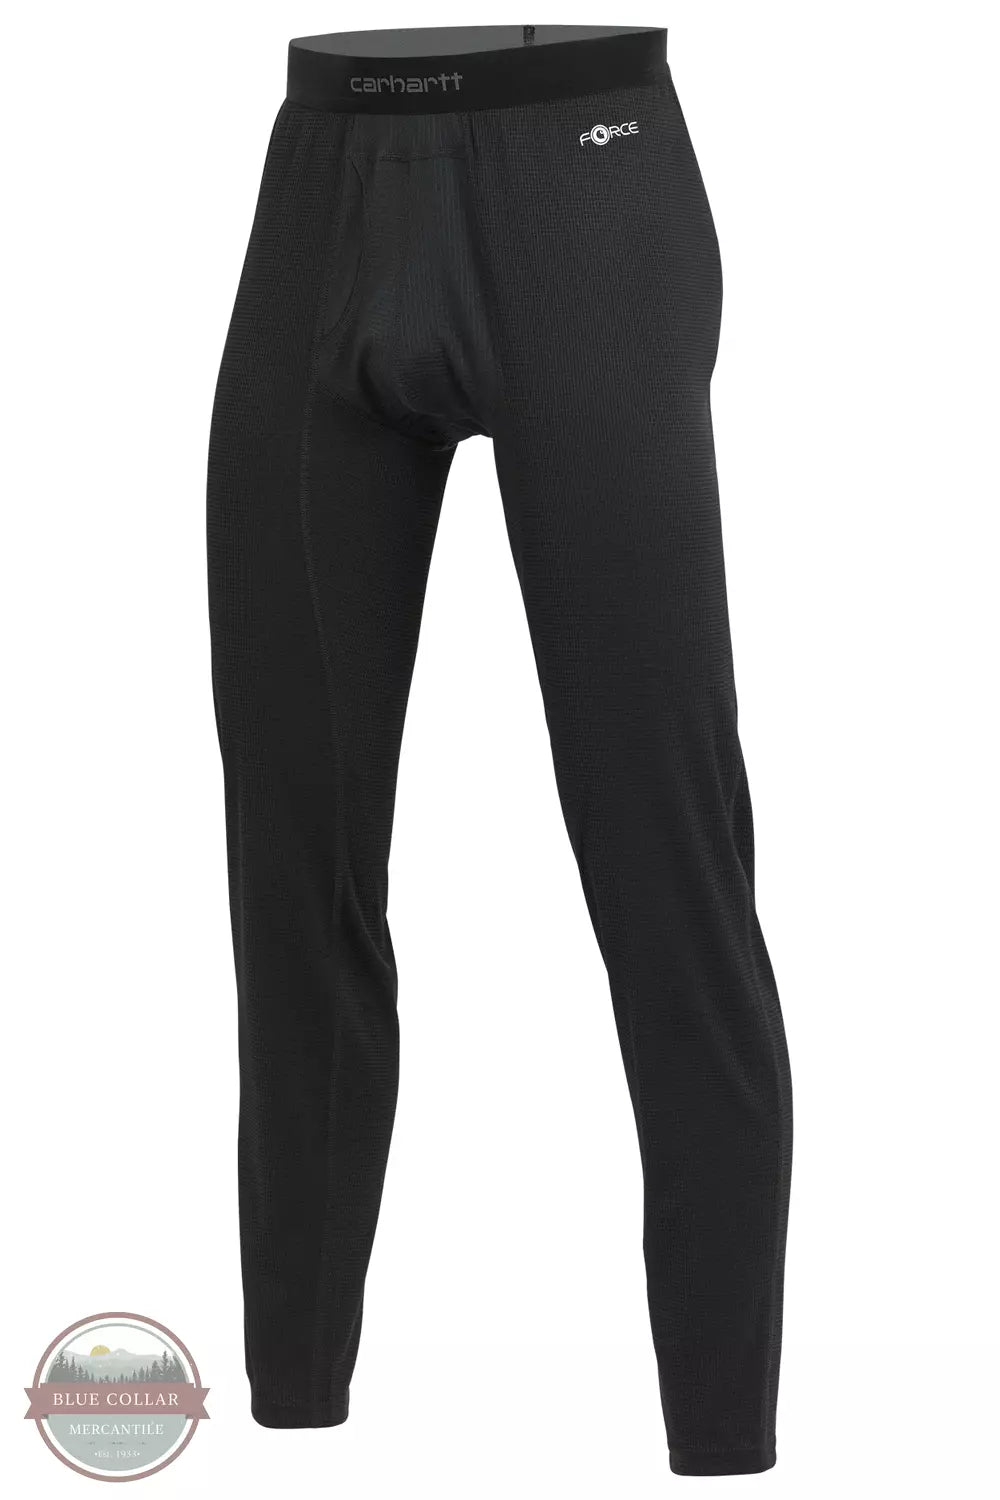 Carhartt UM0224M-BLK Force Midweight Micro-Grid Base Layer Pants in Black Front View